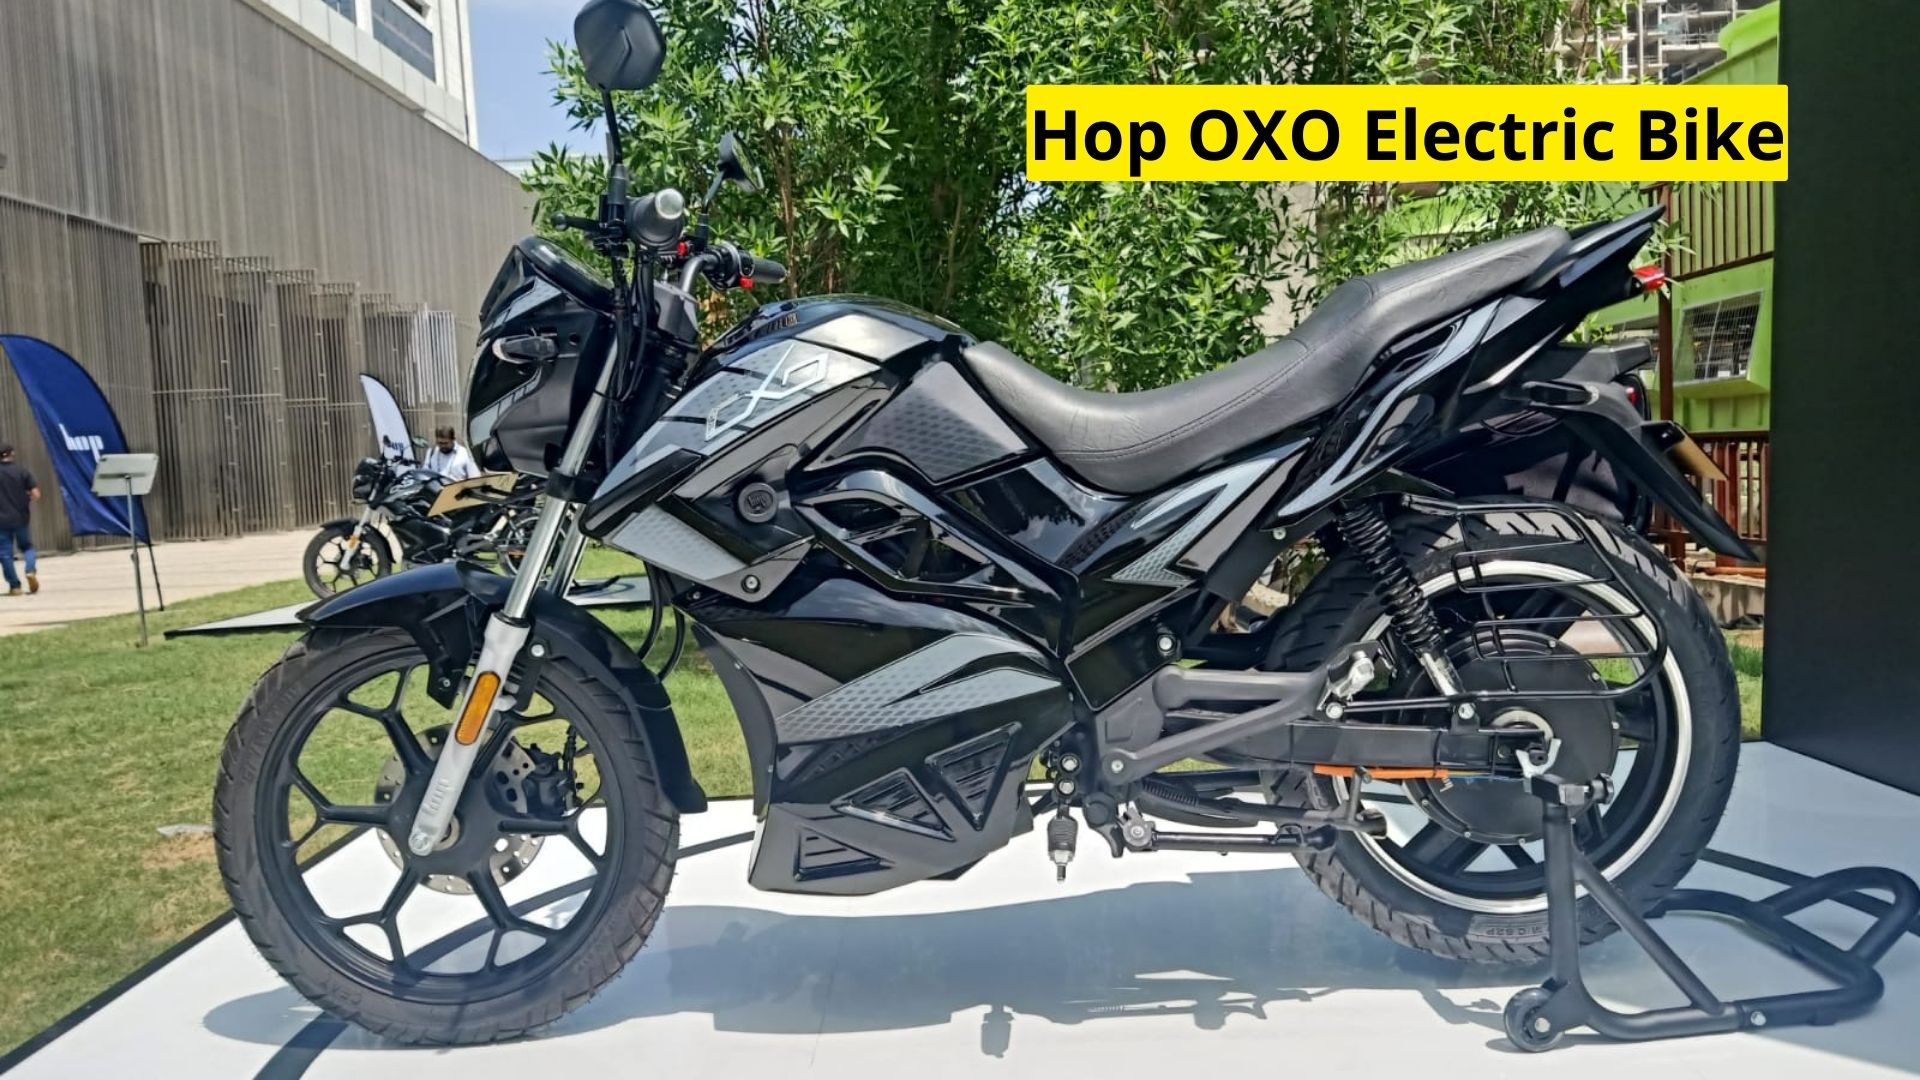 https://e-vehicleinfo.com/hop-oxo-electric-bike-launched-price-range-specification/